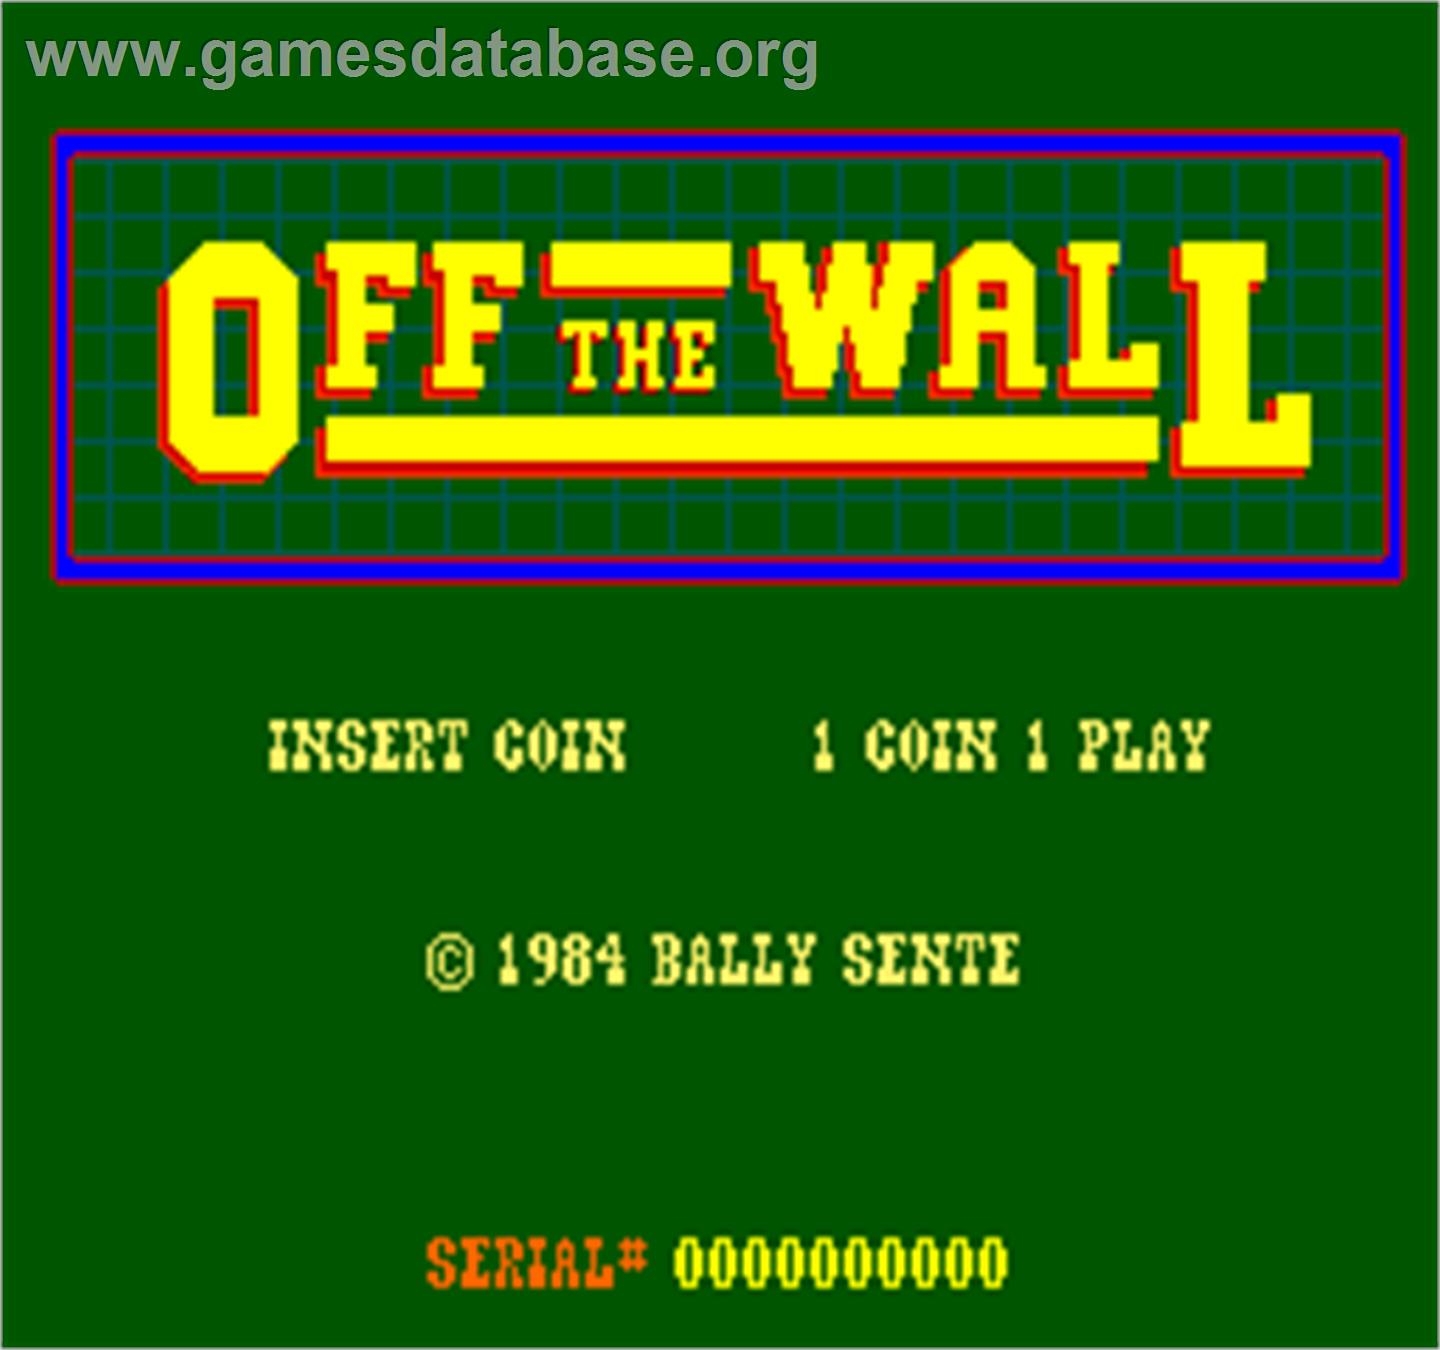 Off the Wall - Arcade - Artwork - Title Screen